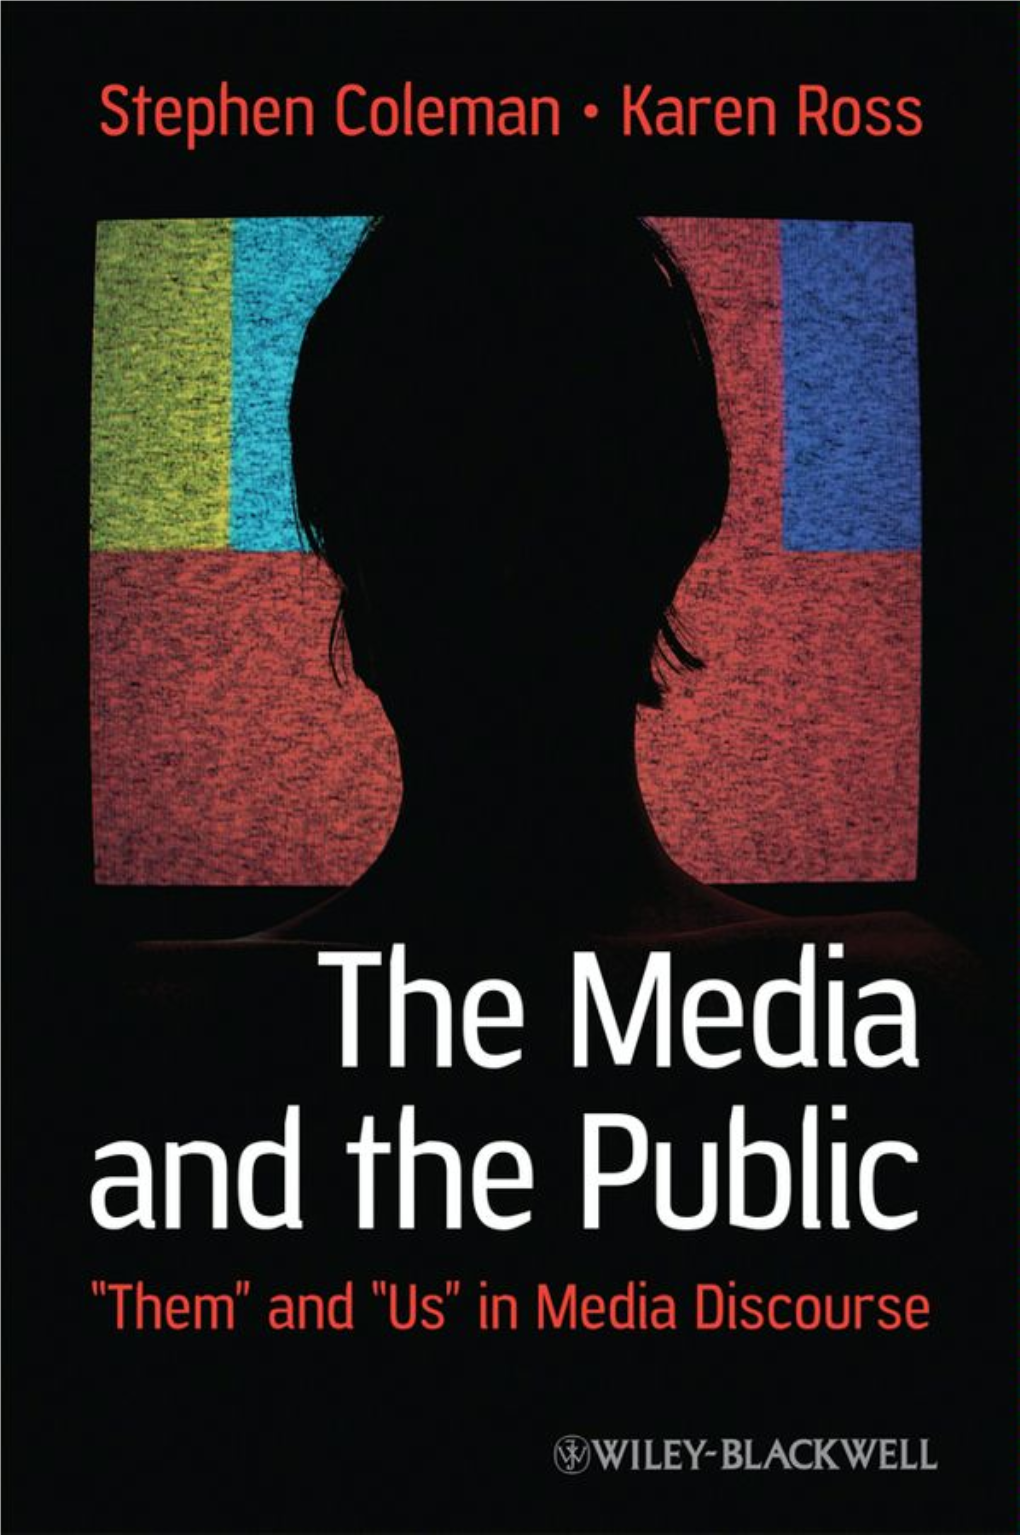 The Media and the Public: "Them" and "Us" in Media Discourse